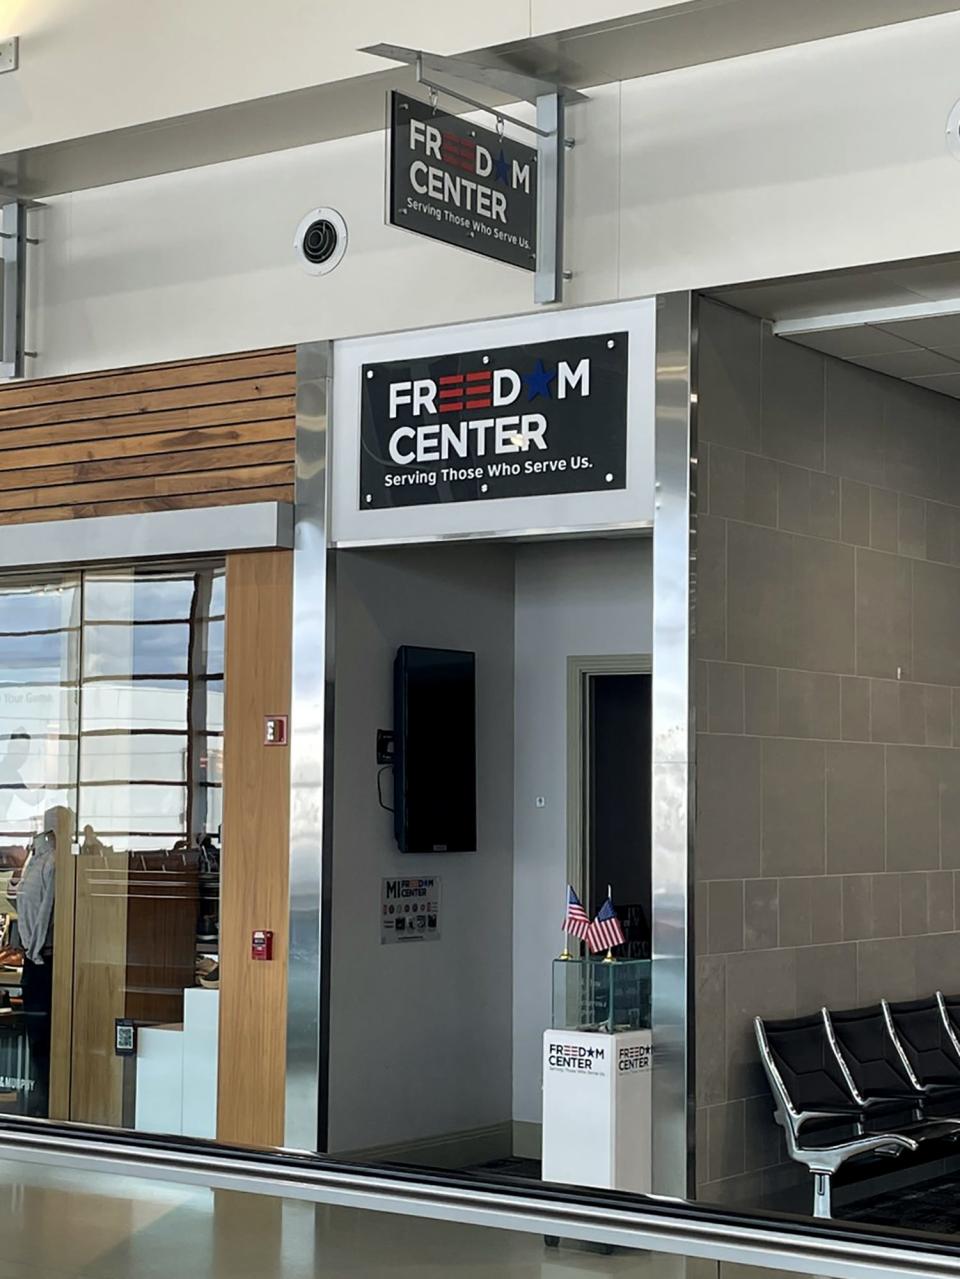 The Michigan Armed Forces Center, also known as Michigan Freedom Center, opened at 11 a.m., Nov. 11, 2011, in the McNamara Terminal, near Gate A43. Since 2011, over 800,000 active duty military members, reservists and military veterans have stopped by.